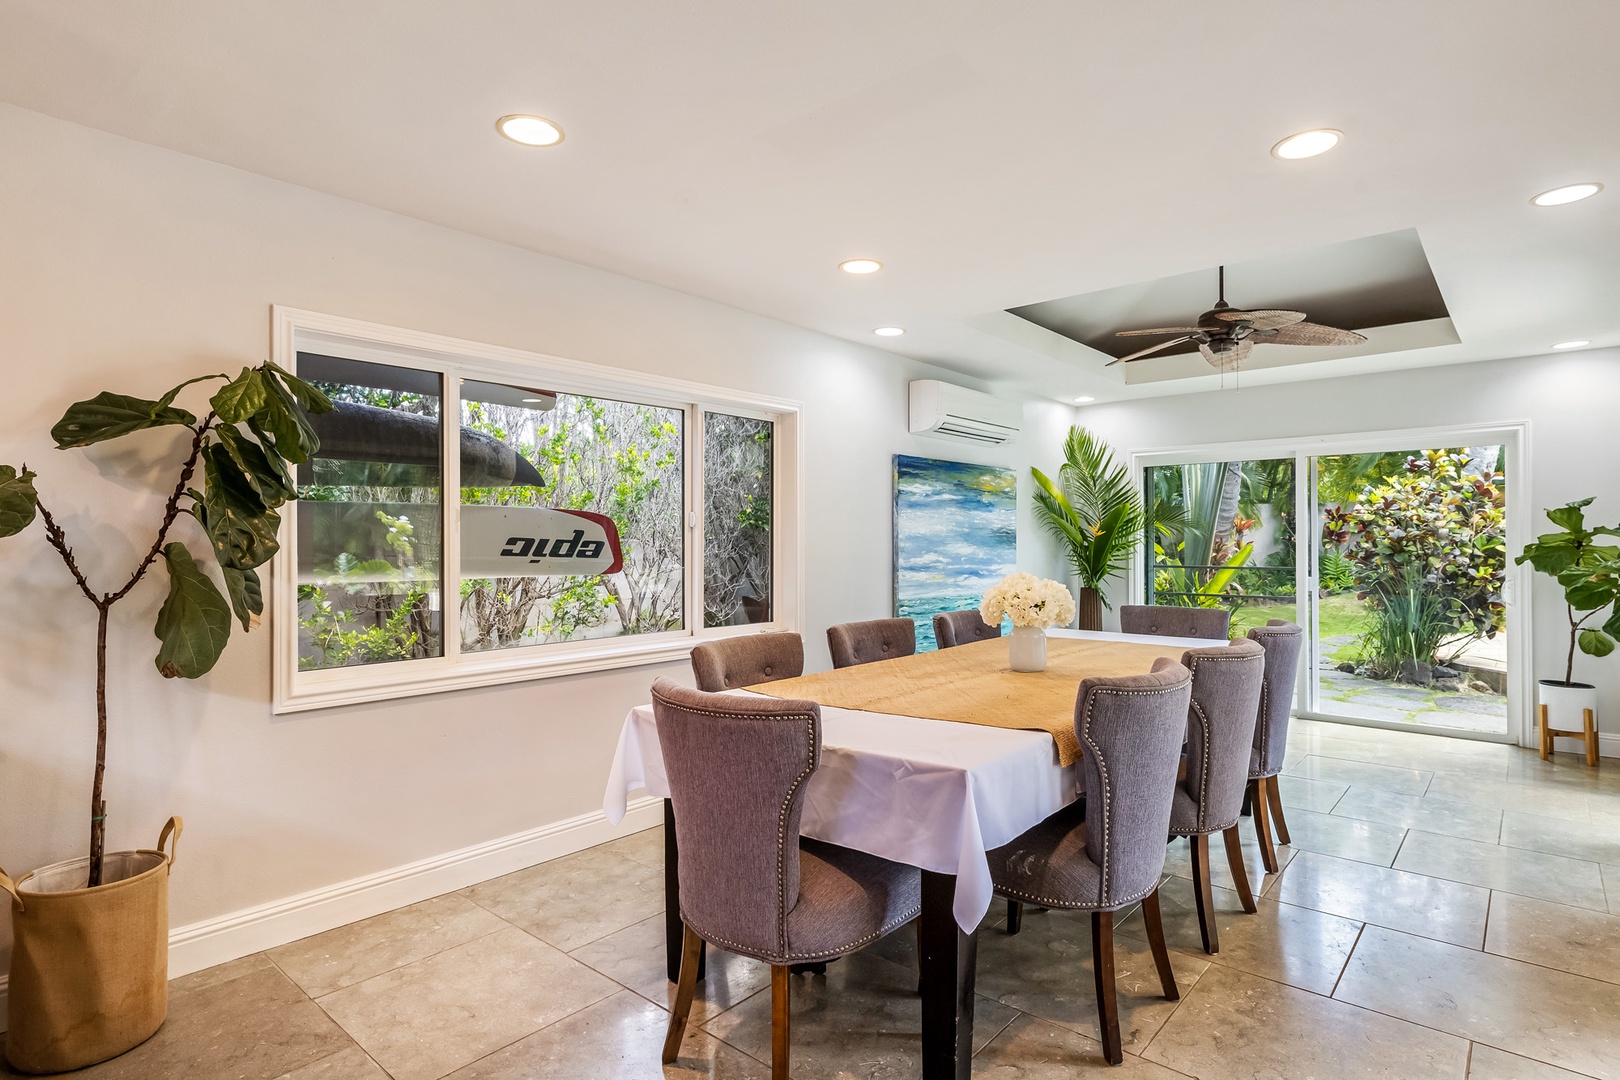 Honolulu Vacation Rentals, Hale Ho'omaha - The dining table comfortably seats 8